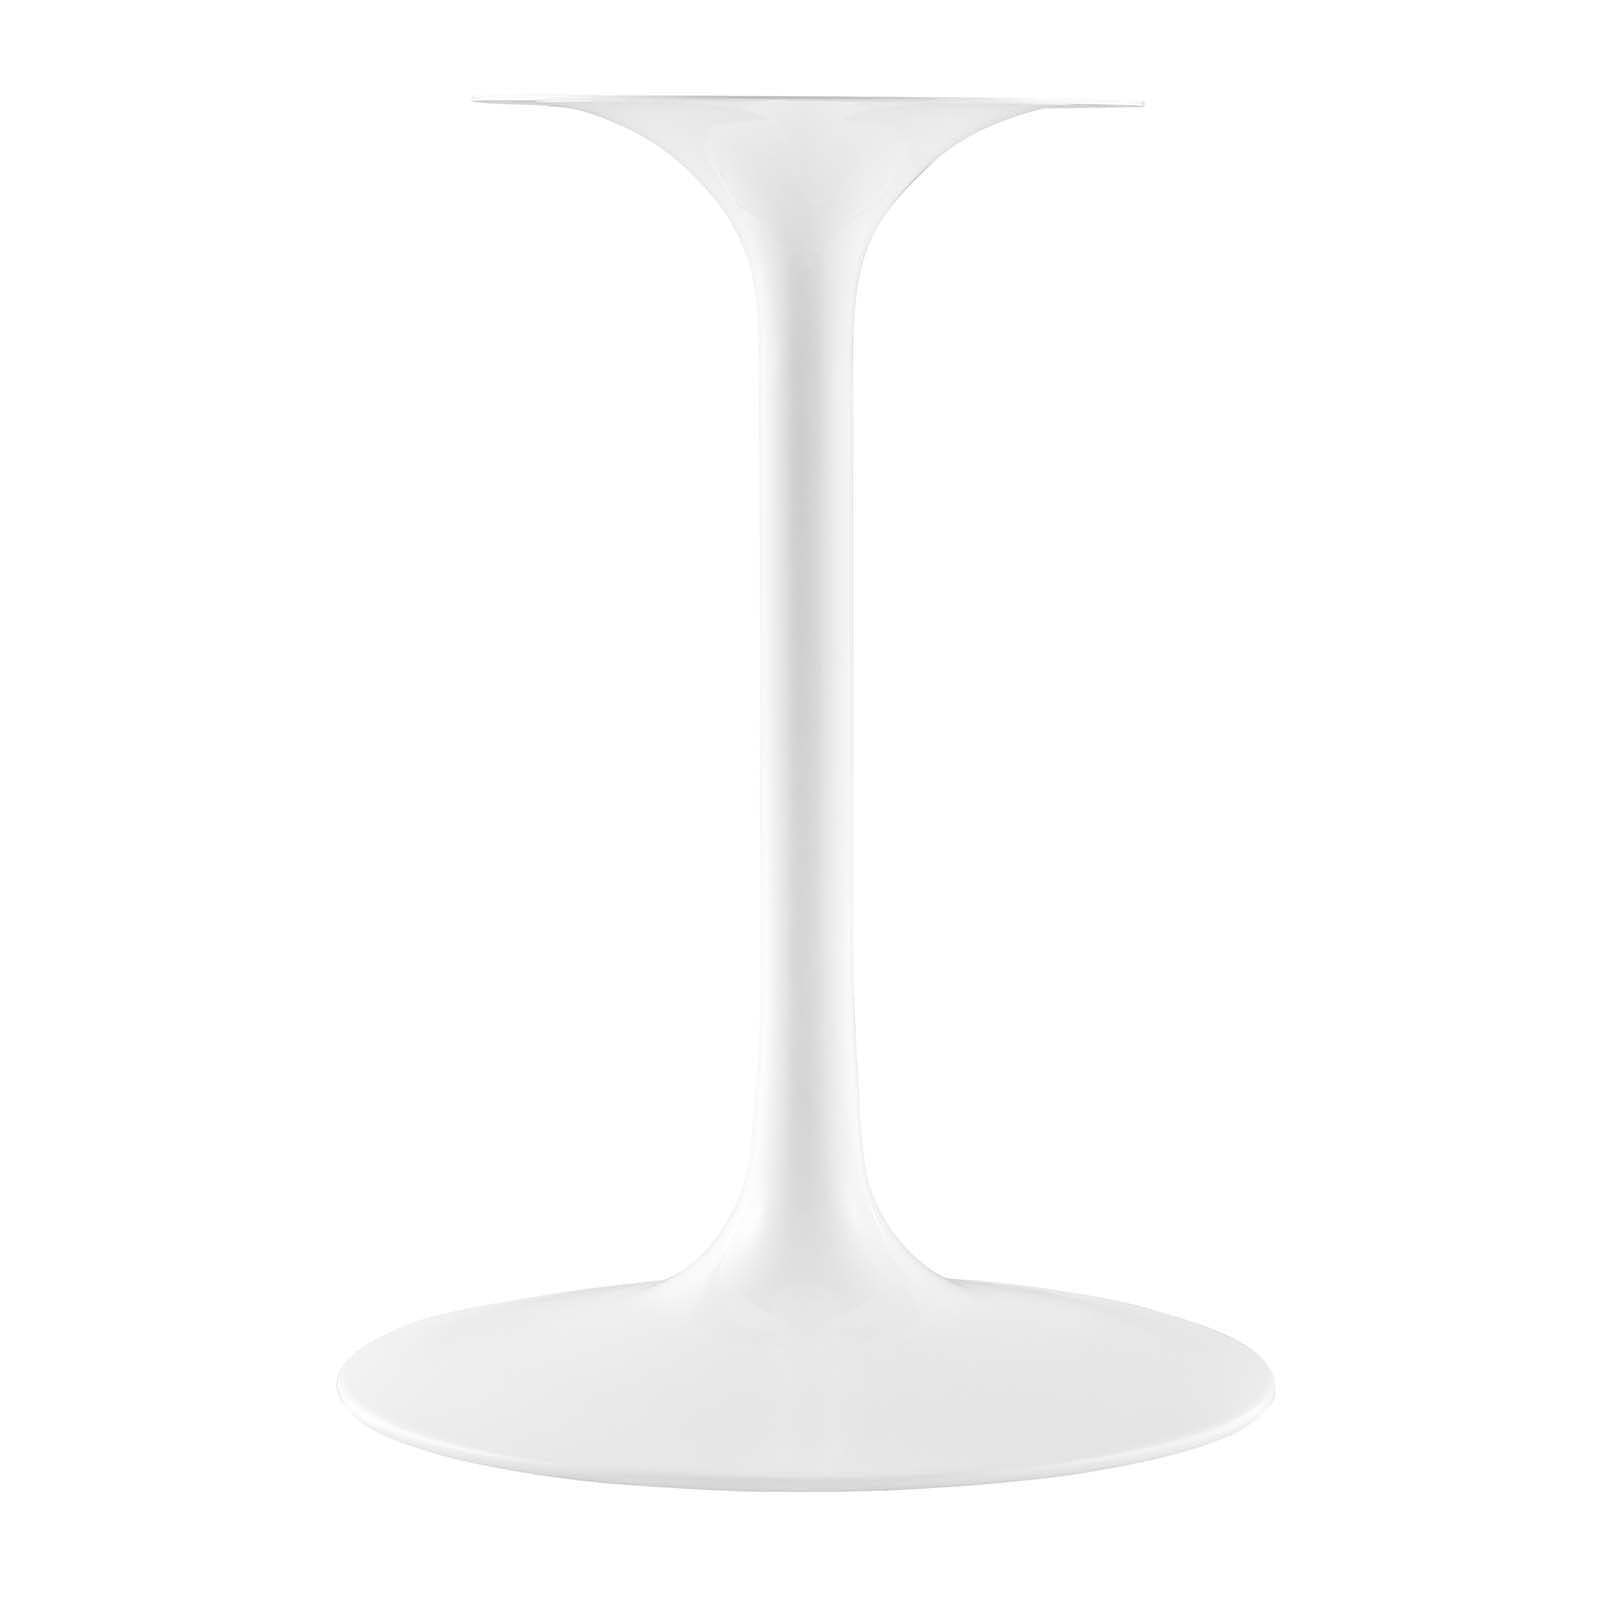 Lippa 36" Round Artificial Travertine Dining Table - East Shore Modern Home Furnishings